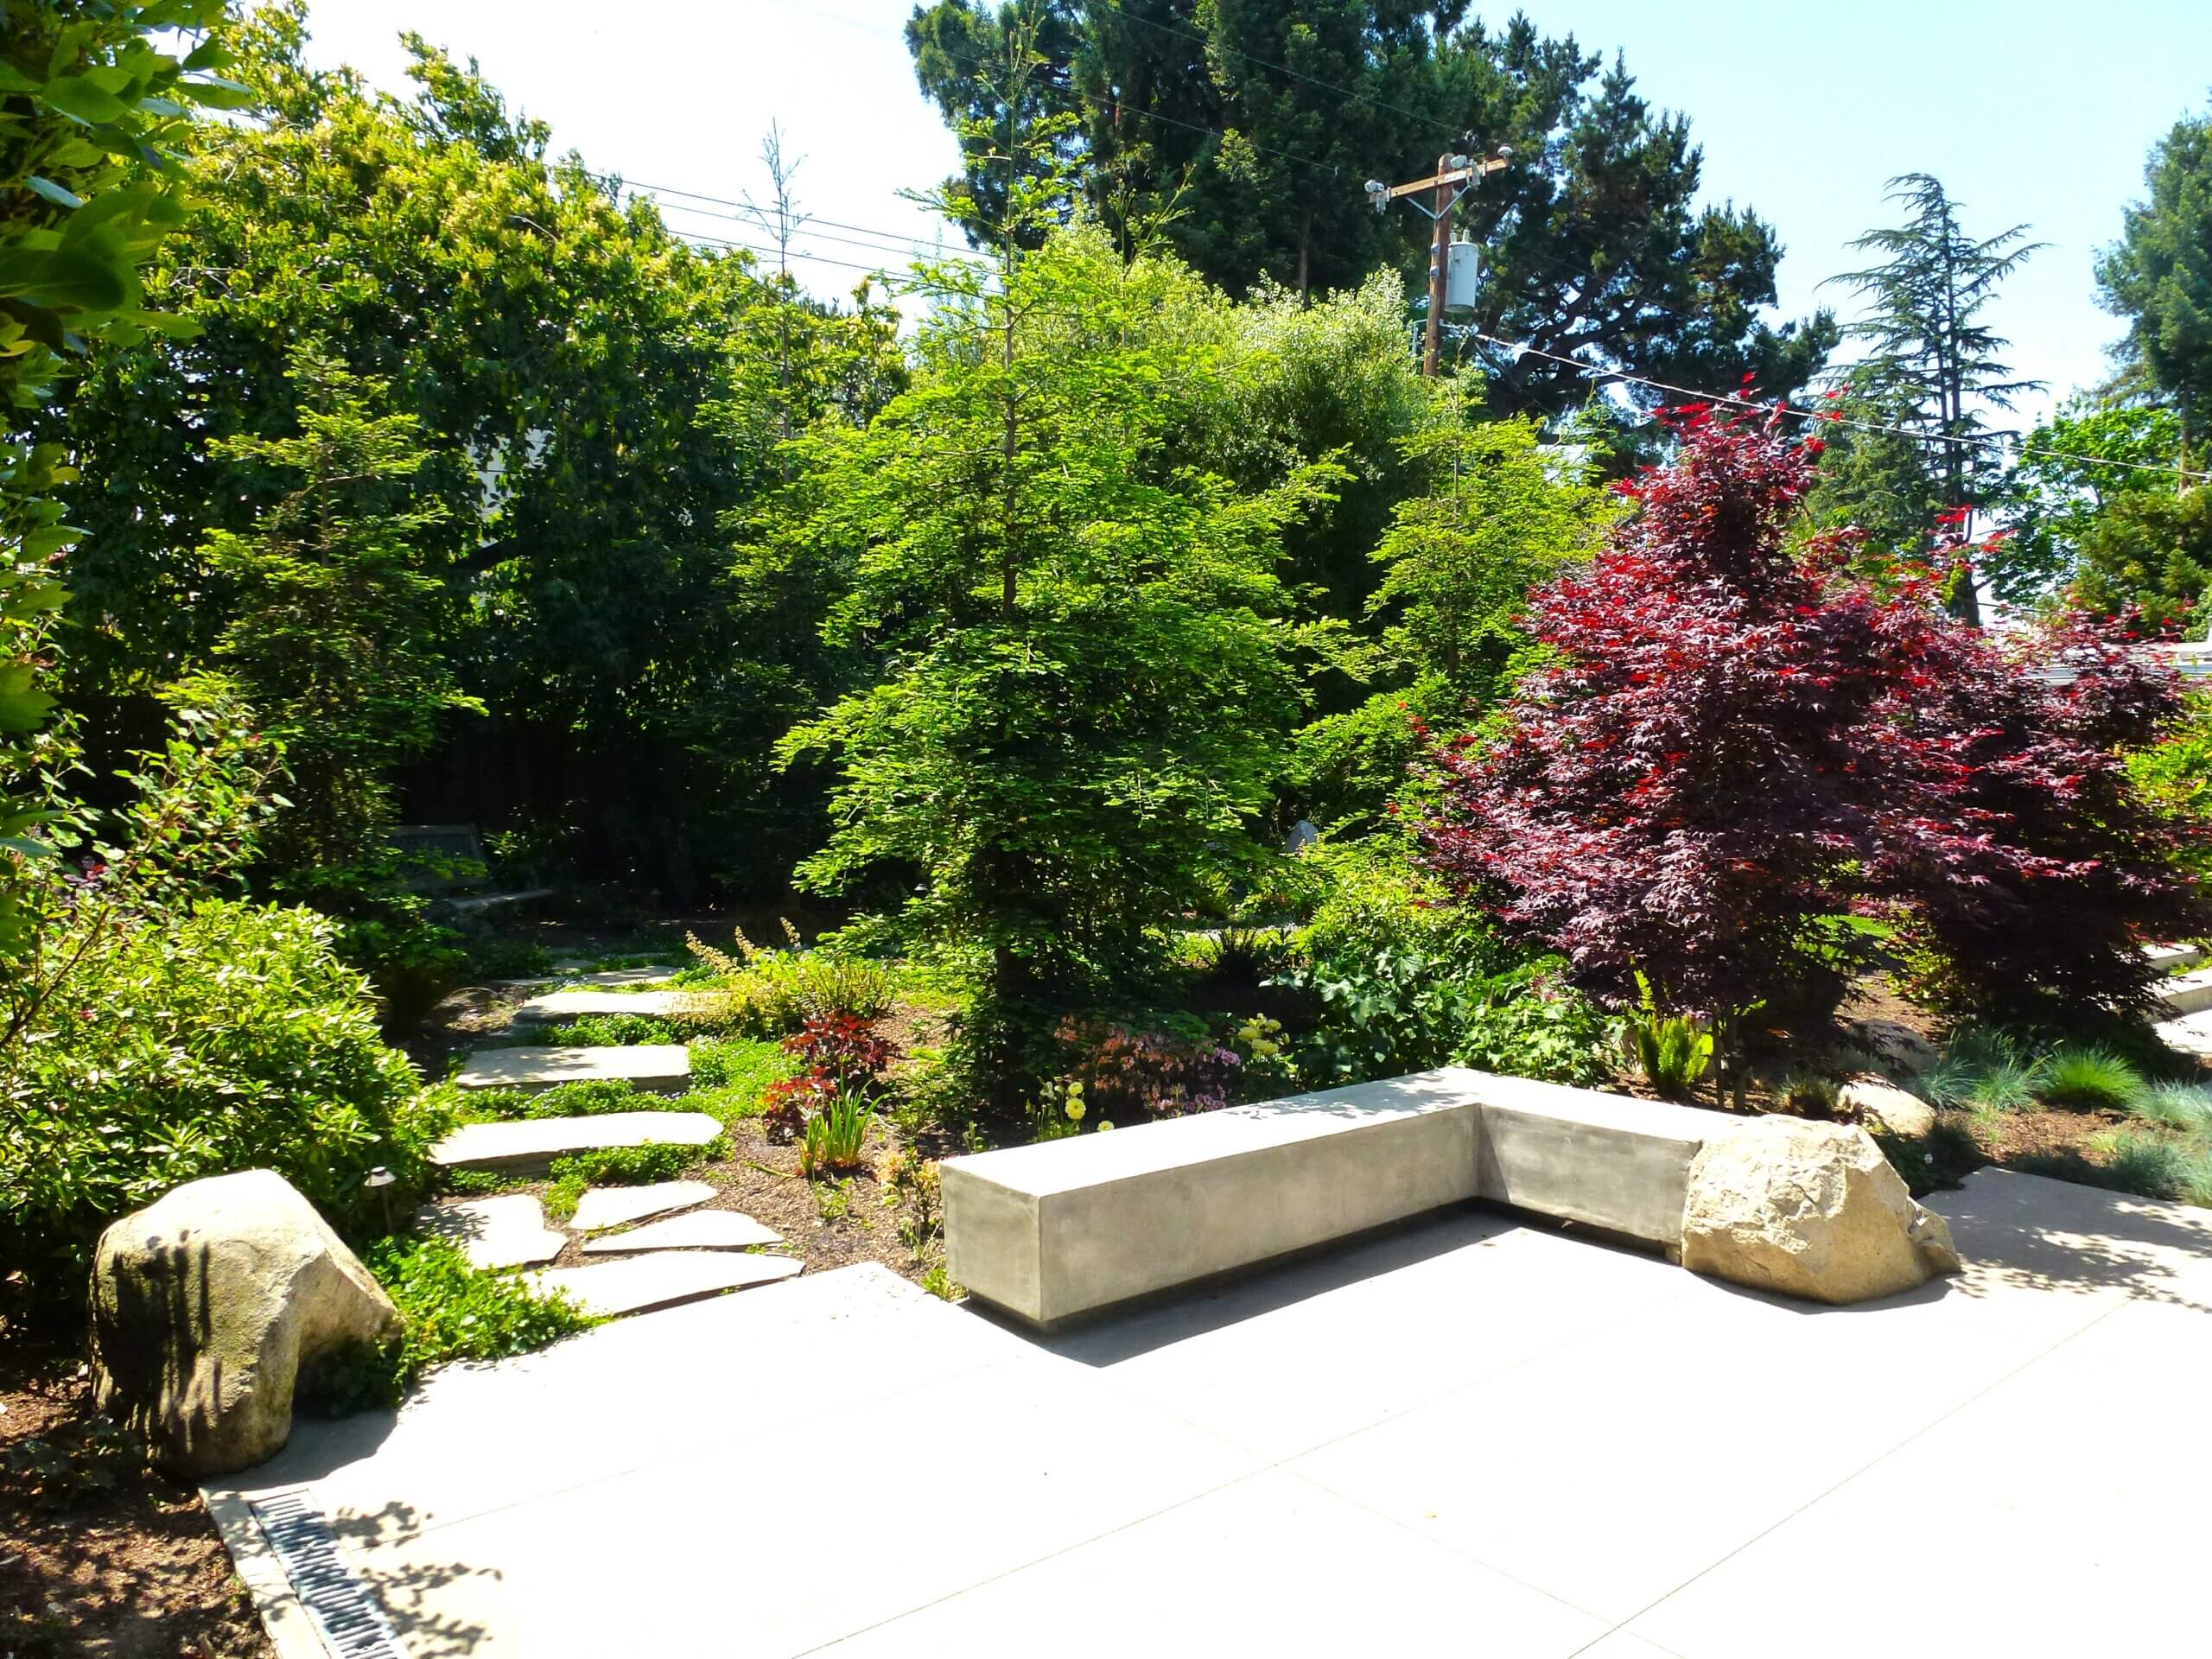 Custom L-shaped concrete bench at edge of back patio with gorgeous trees in backgroound